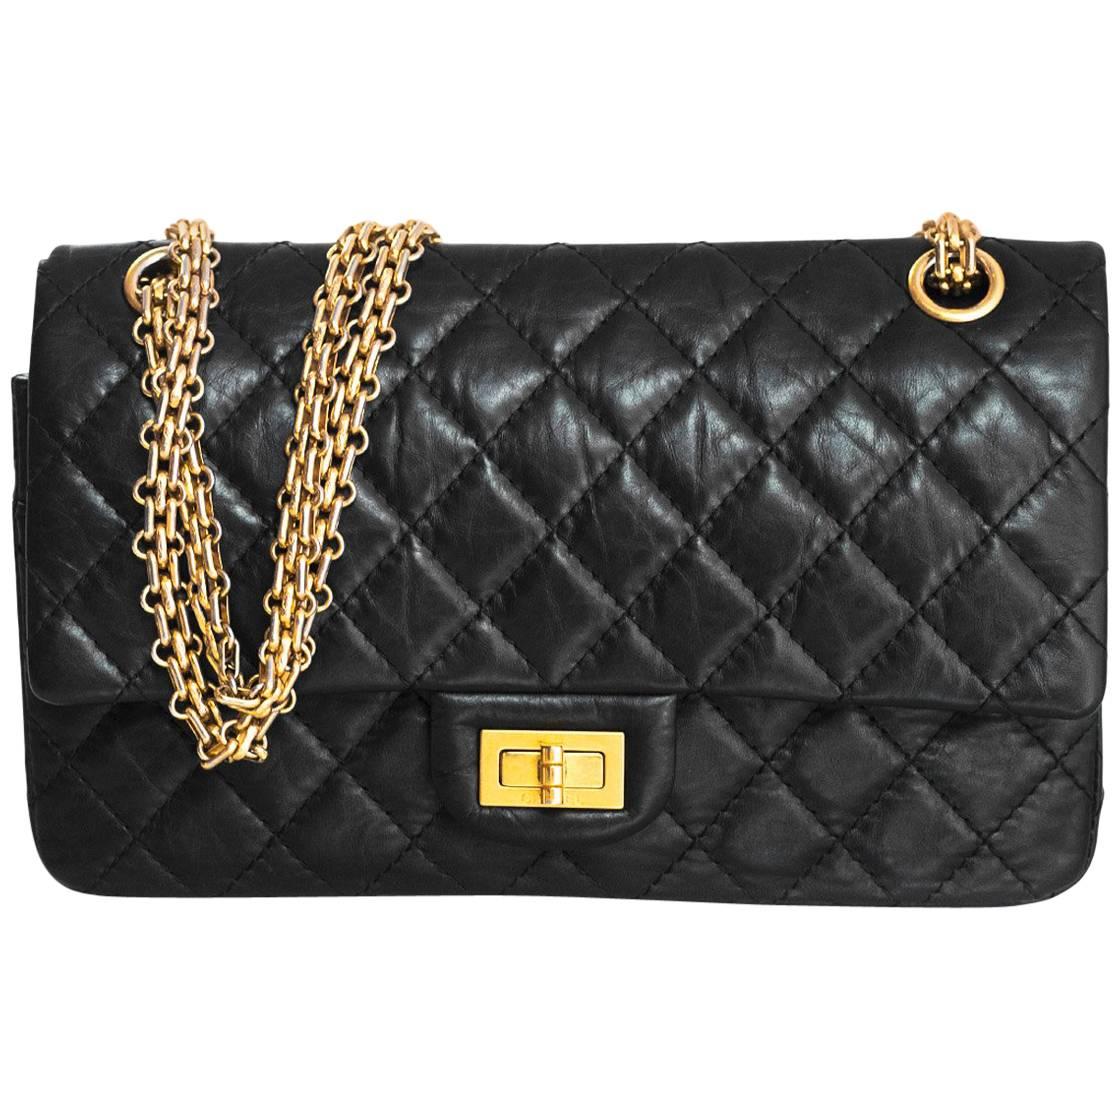 Chanel Black Calfskin Leather 2.55 Reissue 225 Double Flap Classic Bag